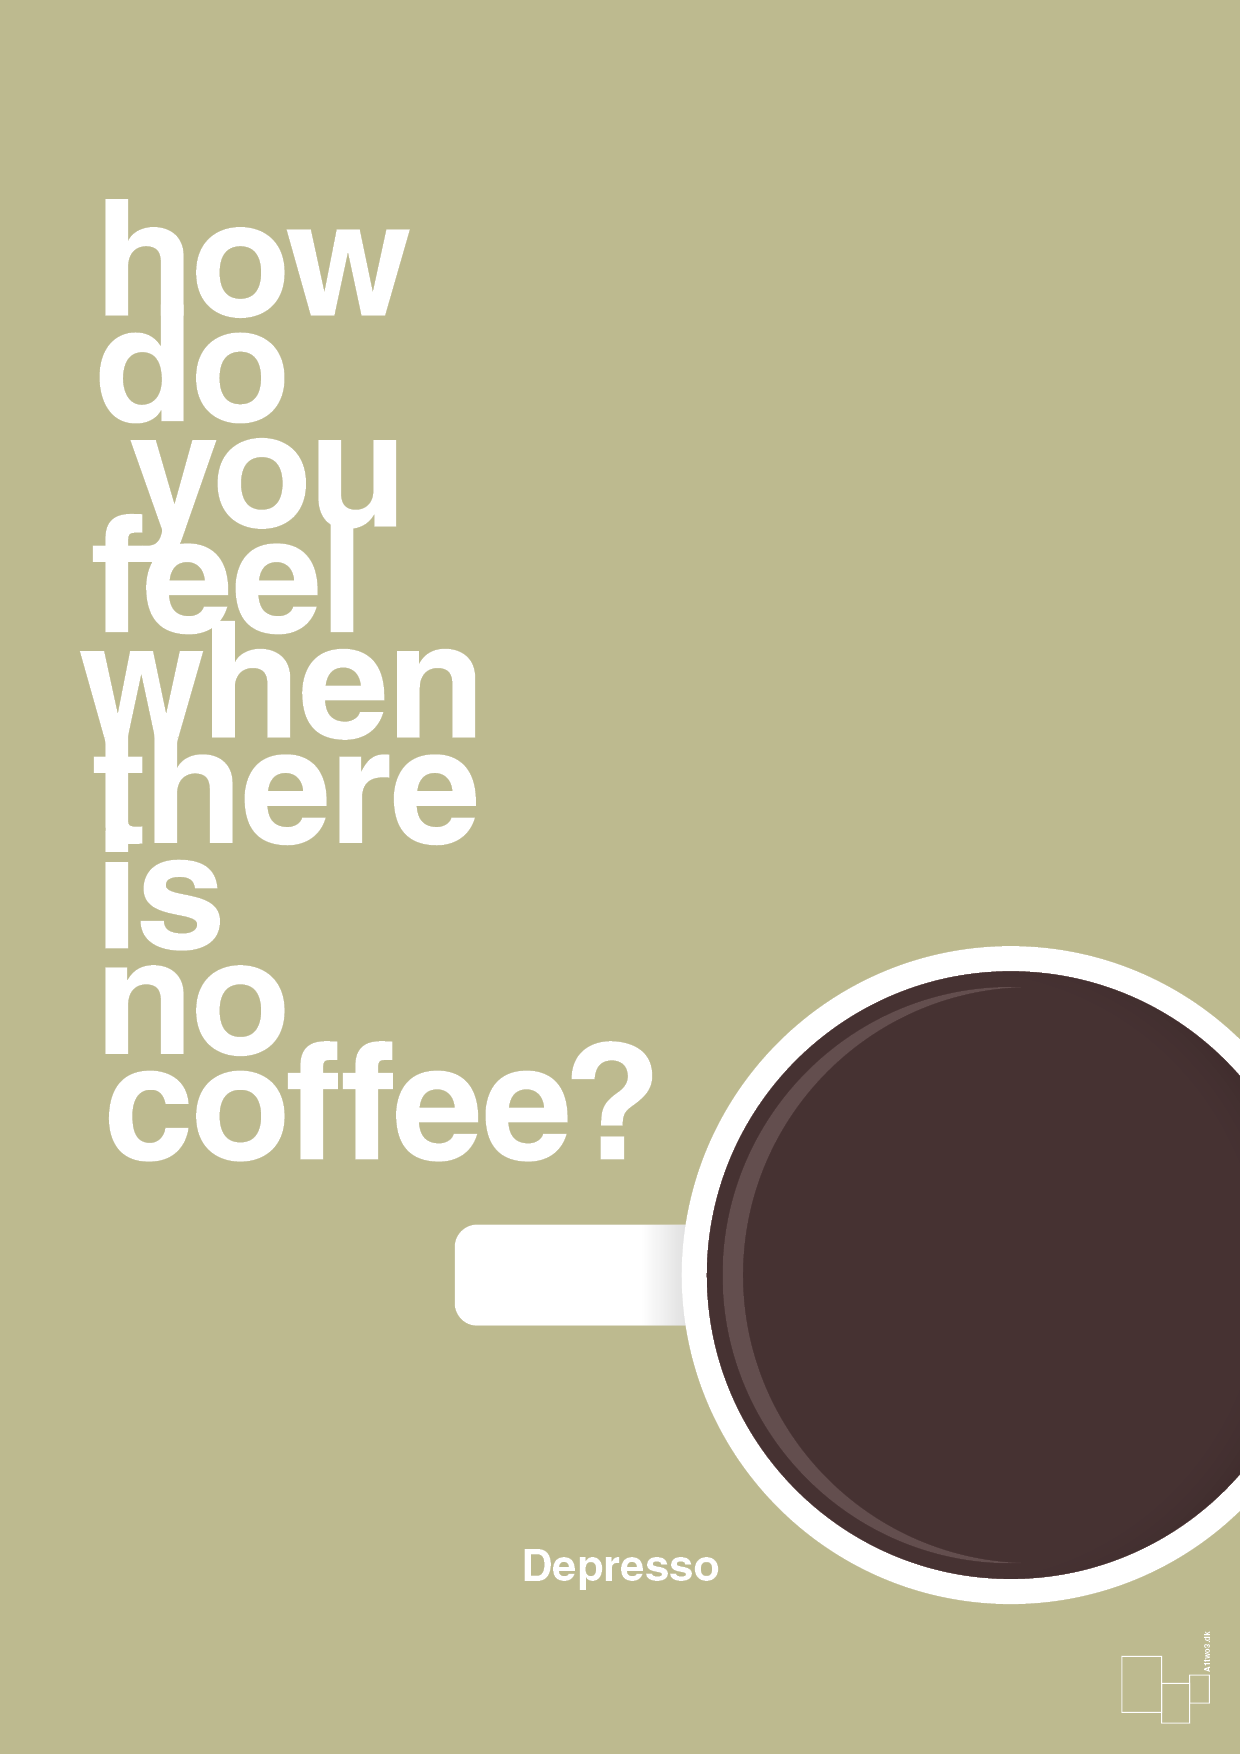 how do you feel when there is no coffee? depresso - Plakat med Mad & Drikke i Back to Nature